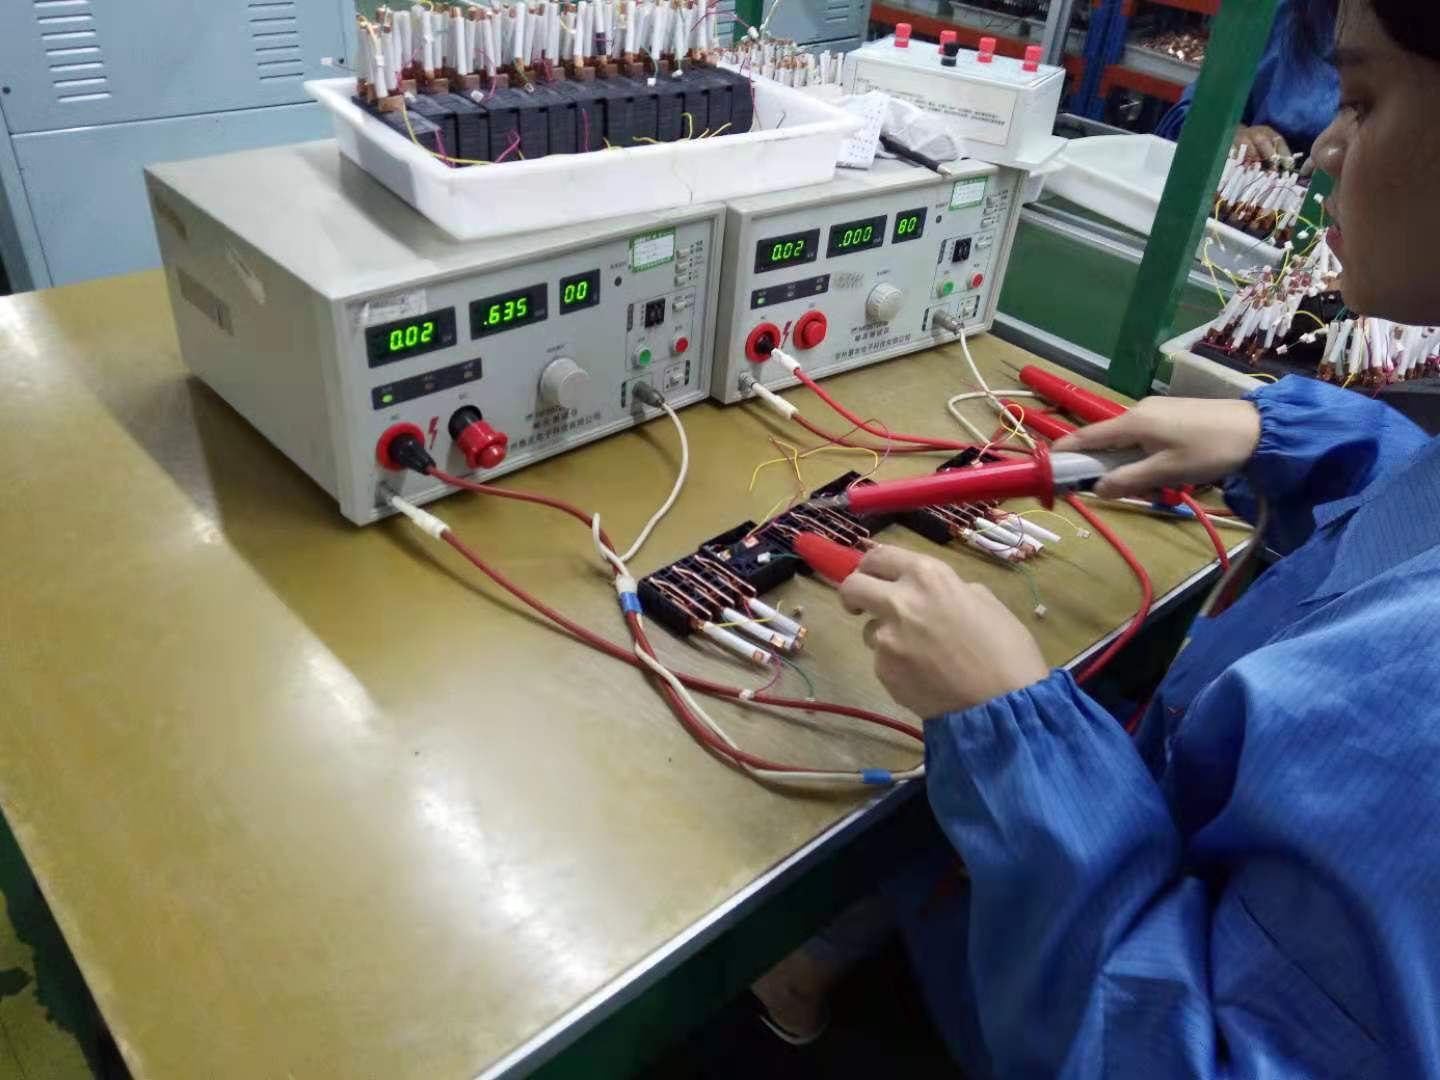 Dielectric strength tester